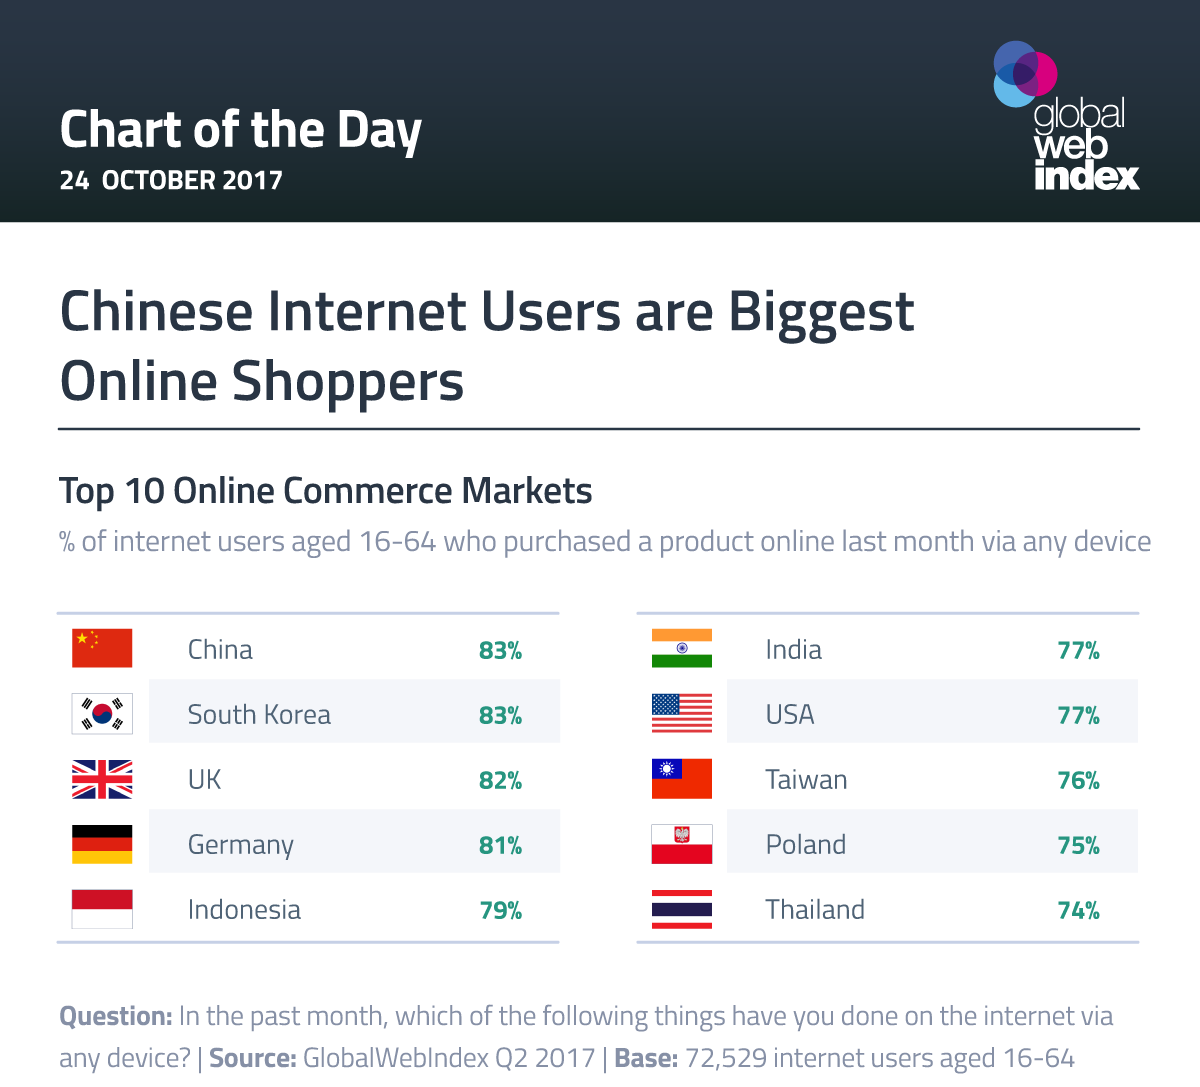 Chinese Internet Users are Biggest Online Shoppers